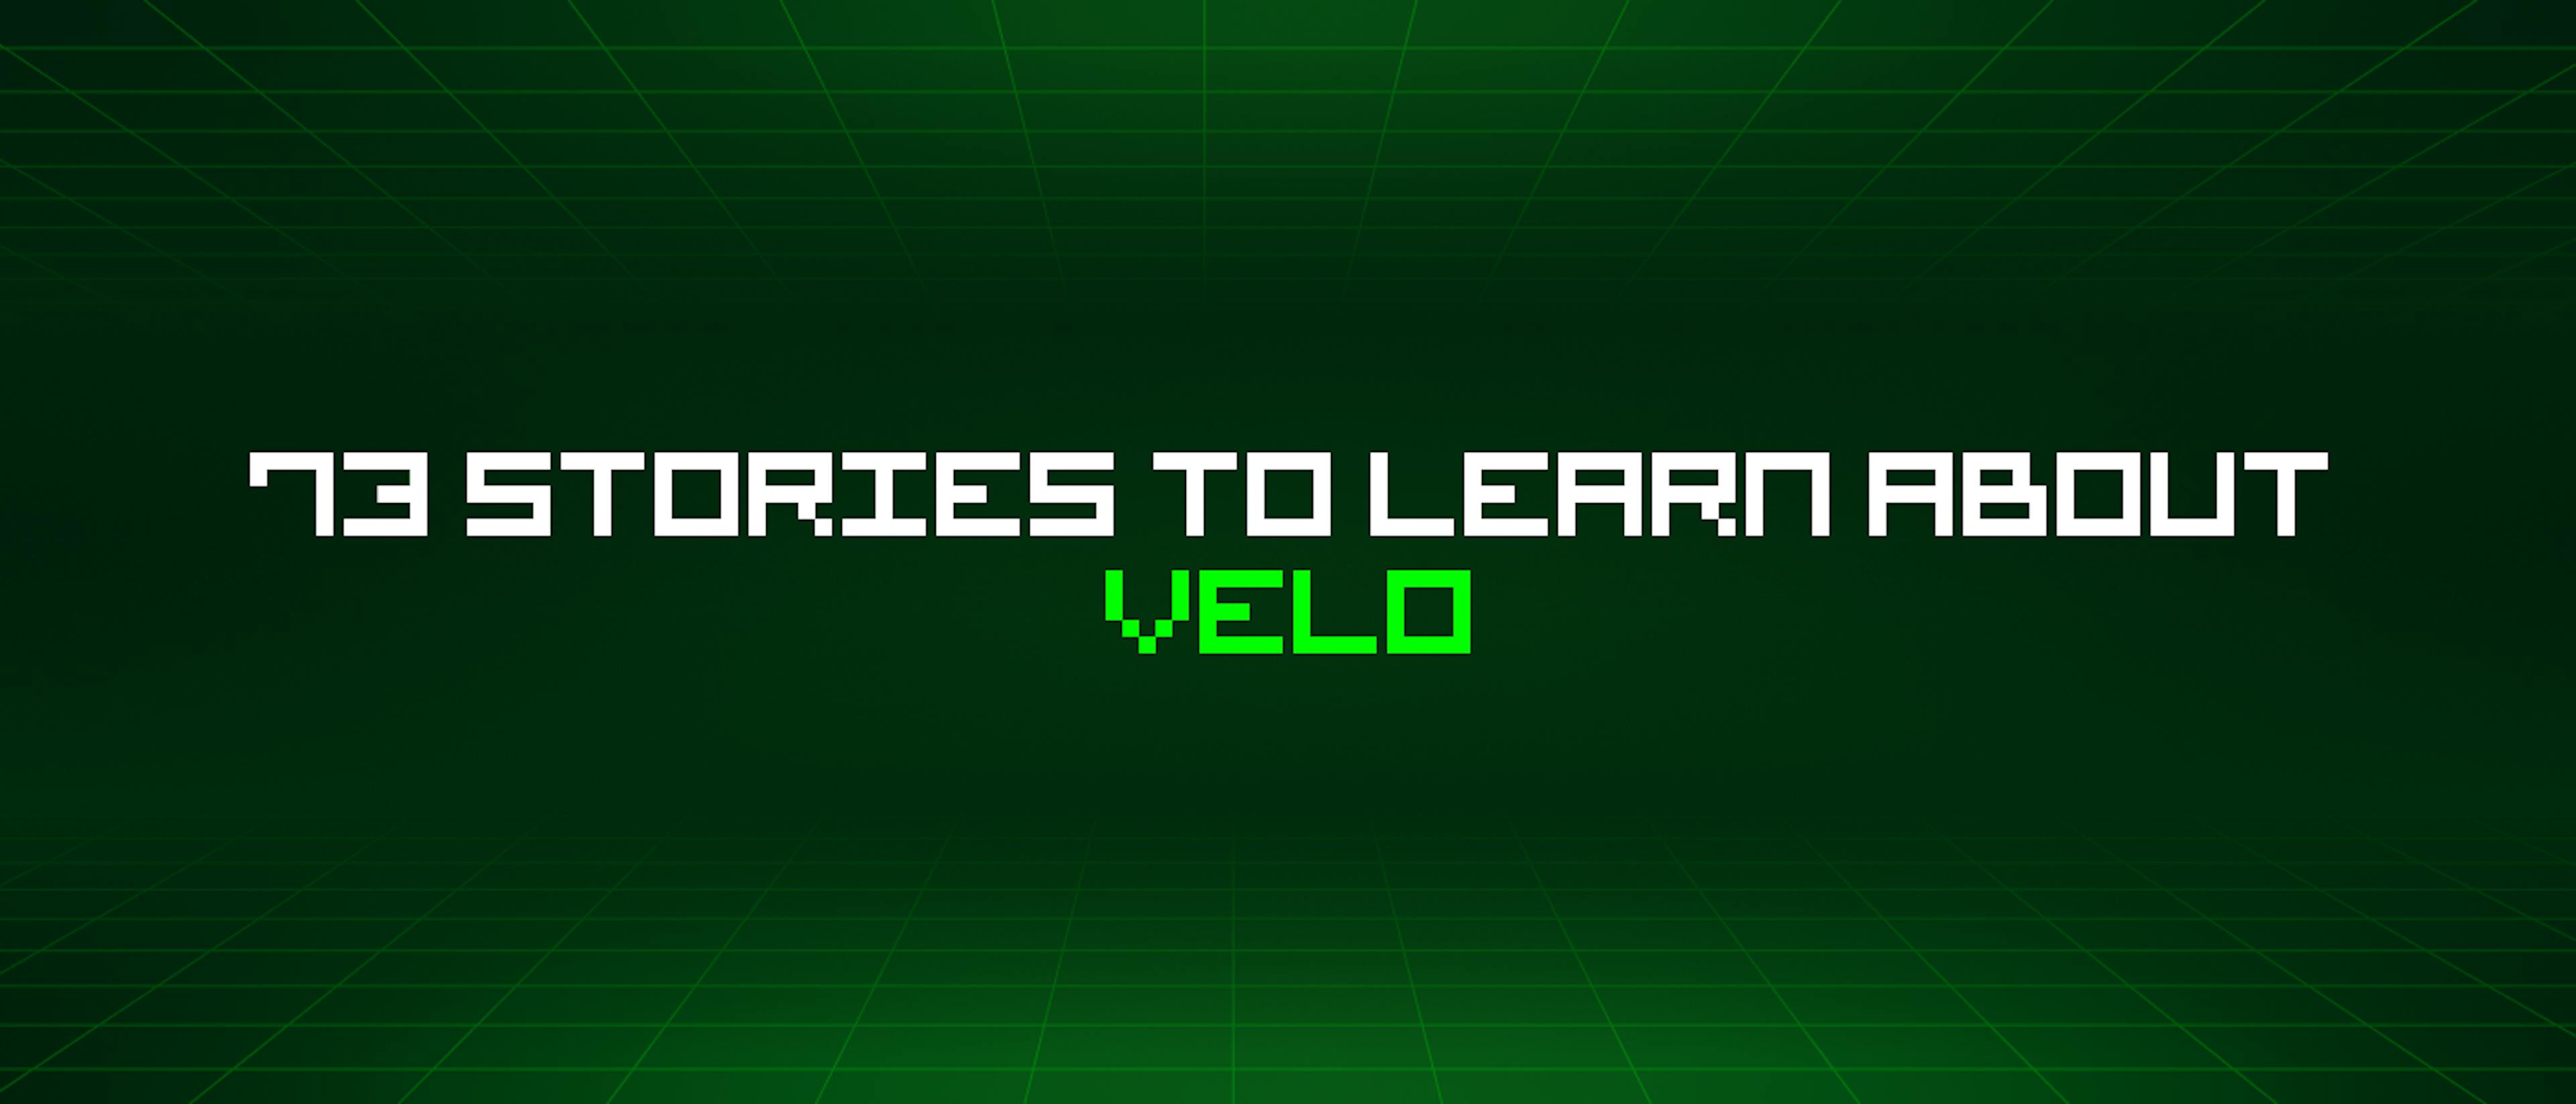 featured image - 73 Stories To Learn About Velo